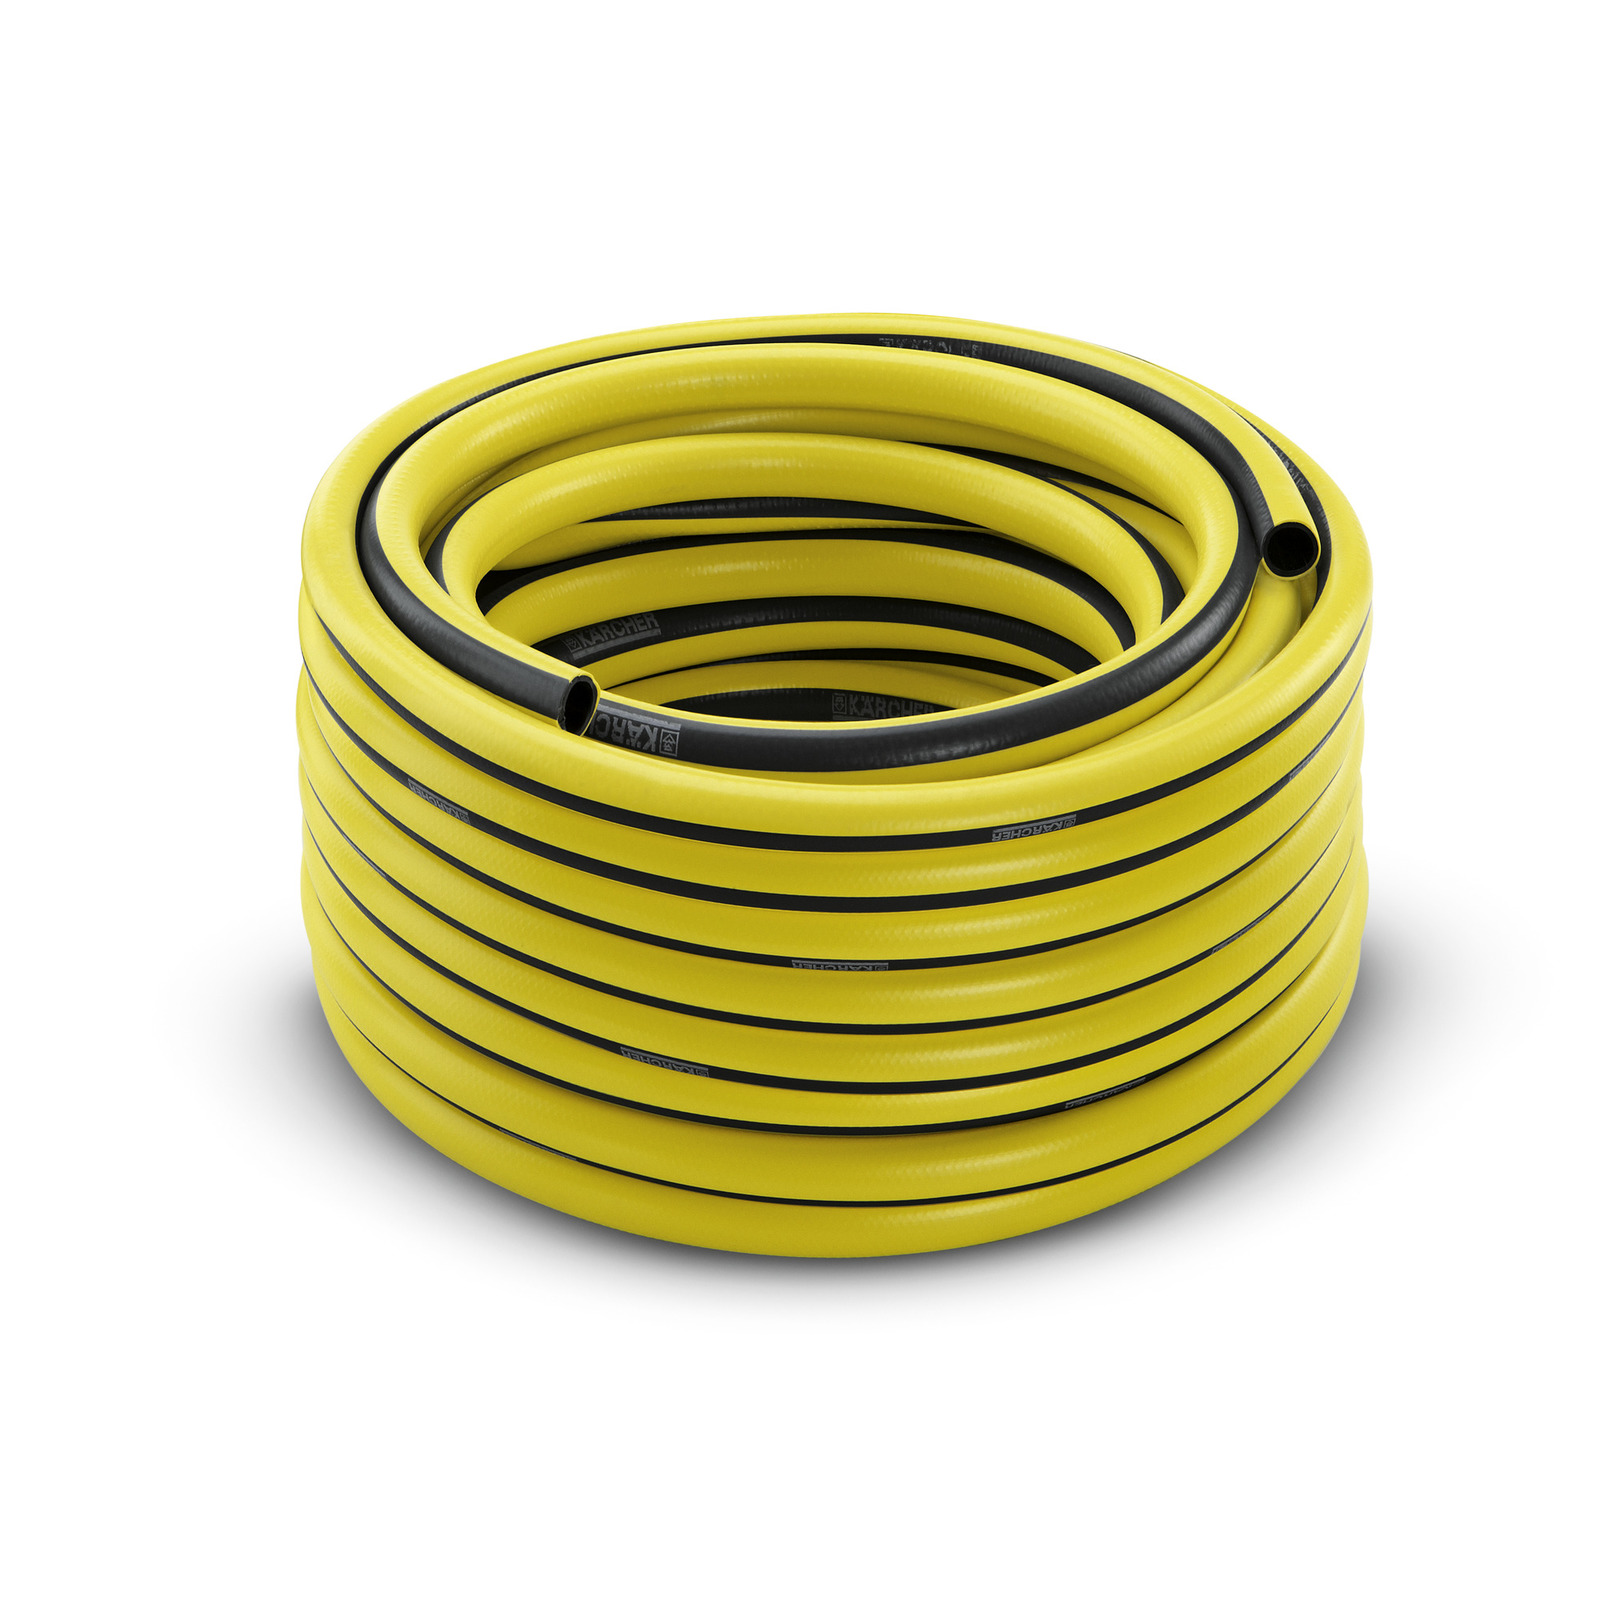 50M YELLOW REINFORCED GARDEN HOSE HOME WATERING CLEANING HEAVY DUTY NEW 